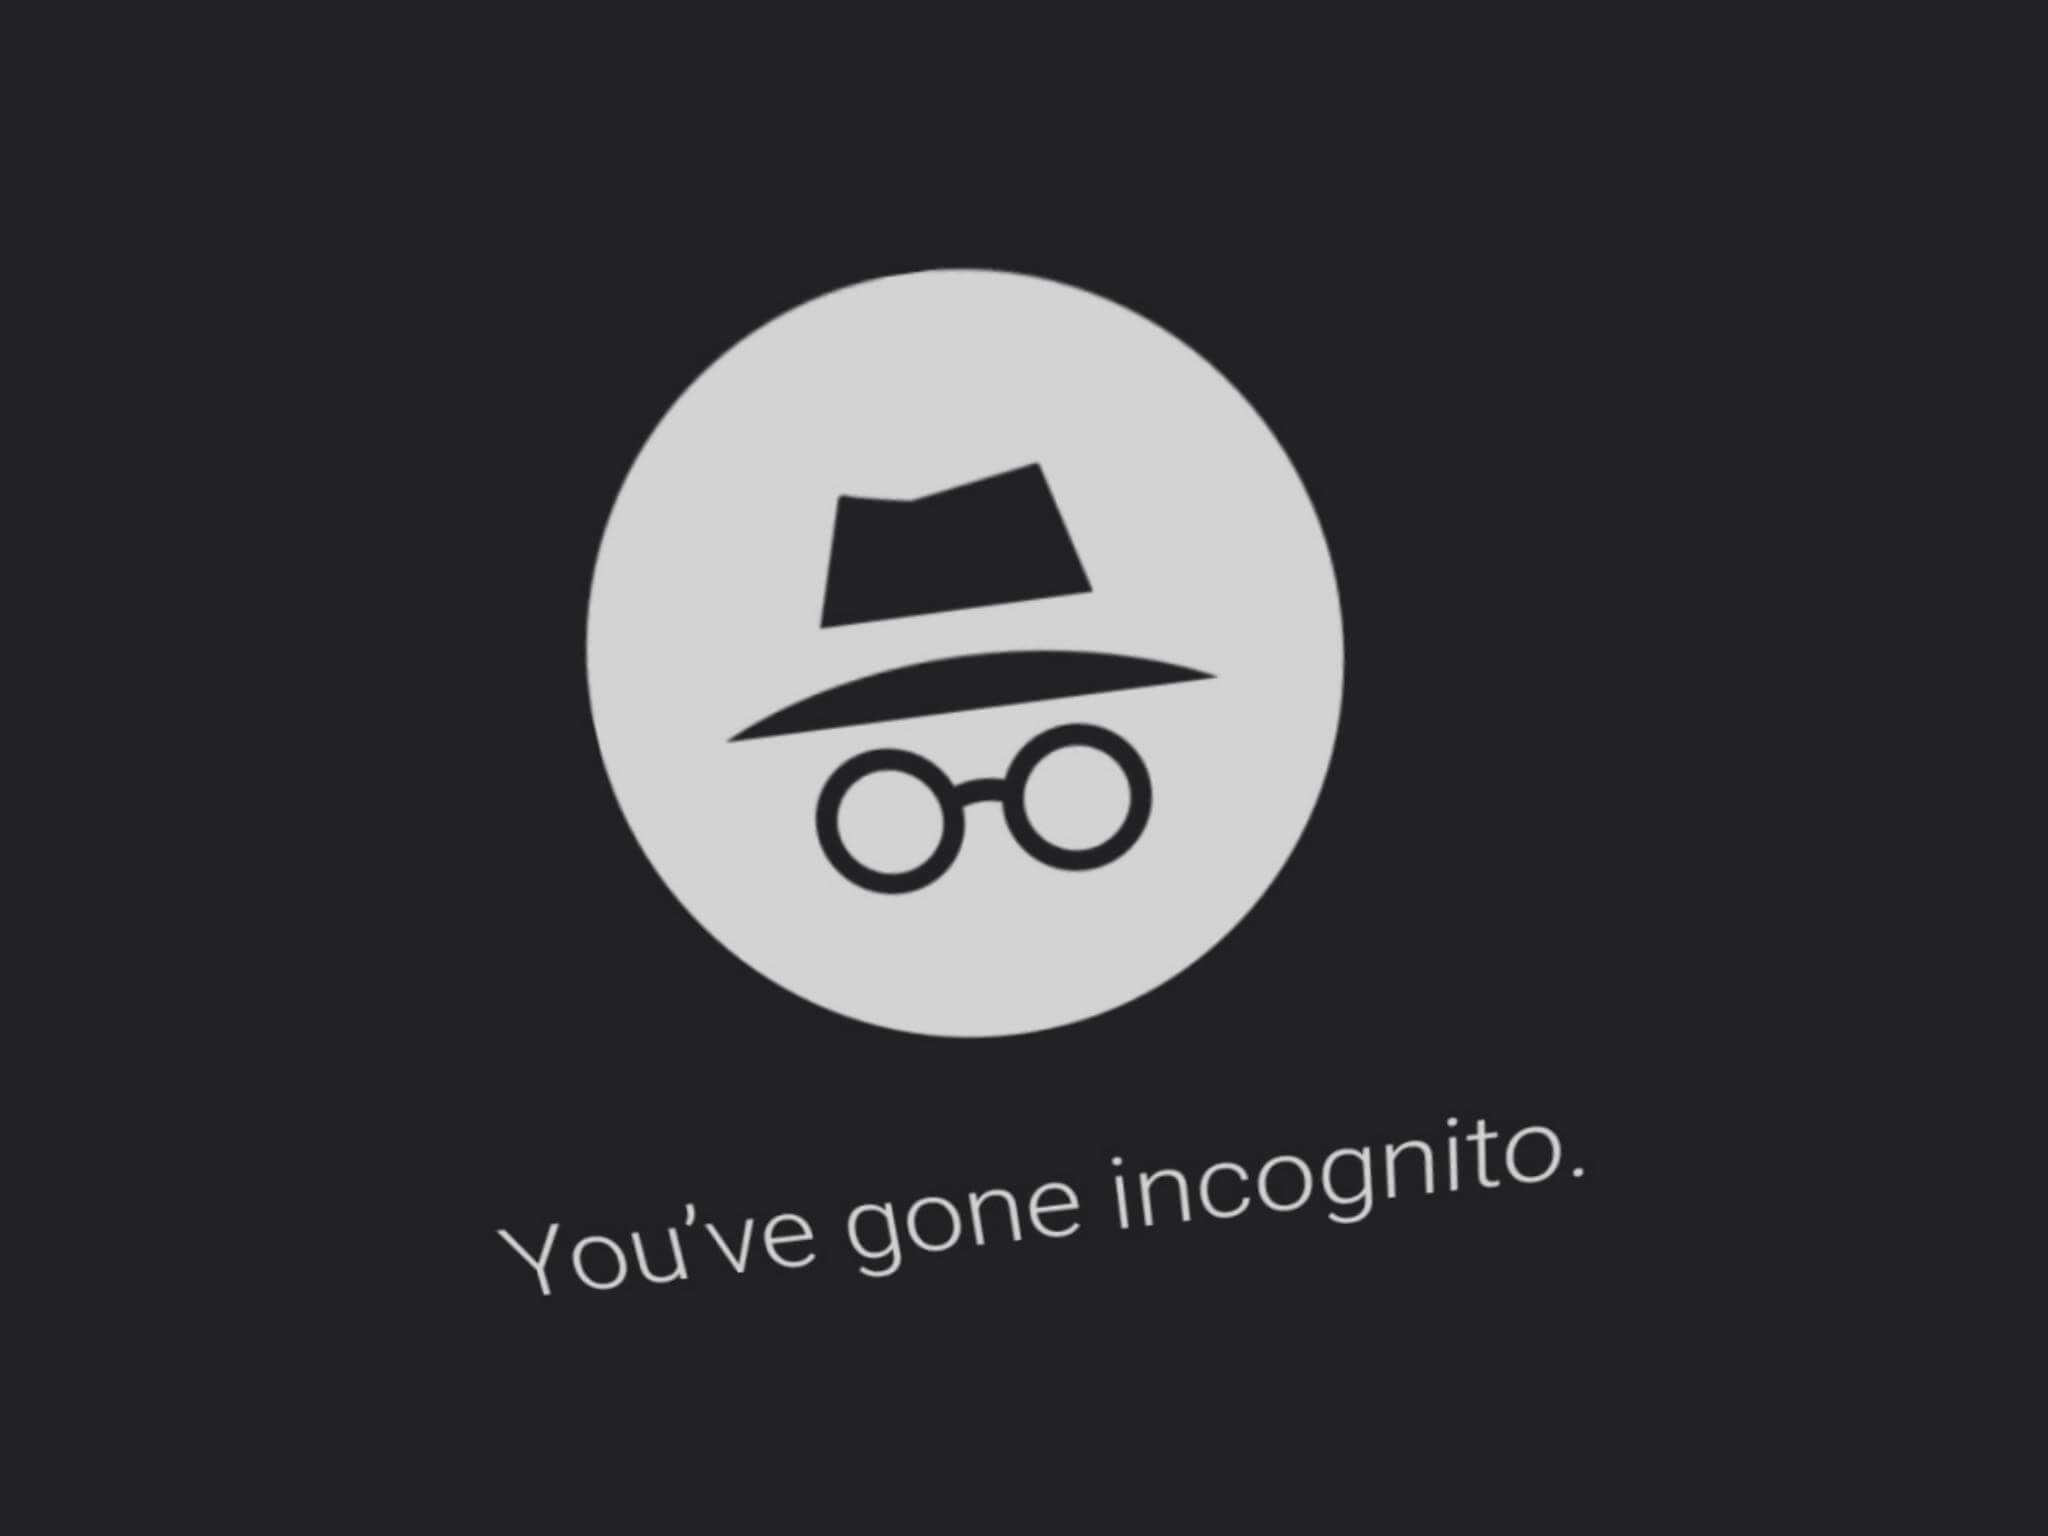 Google confirms that websites soon won't be able to detect Chrome's incognito mode